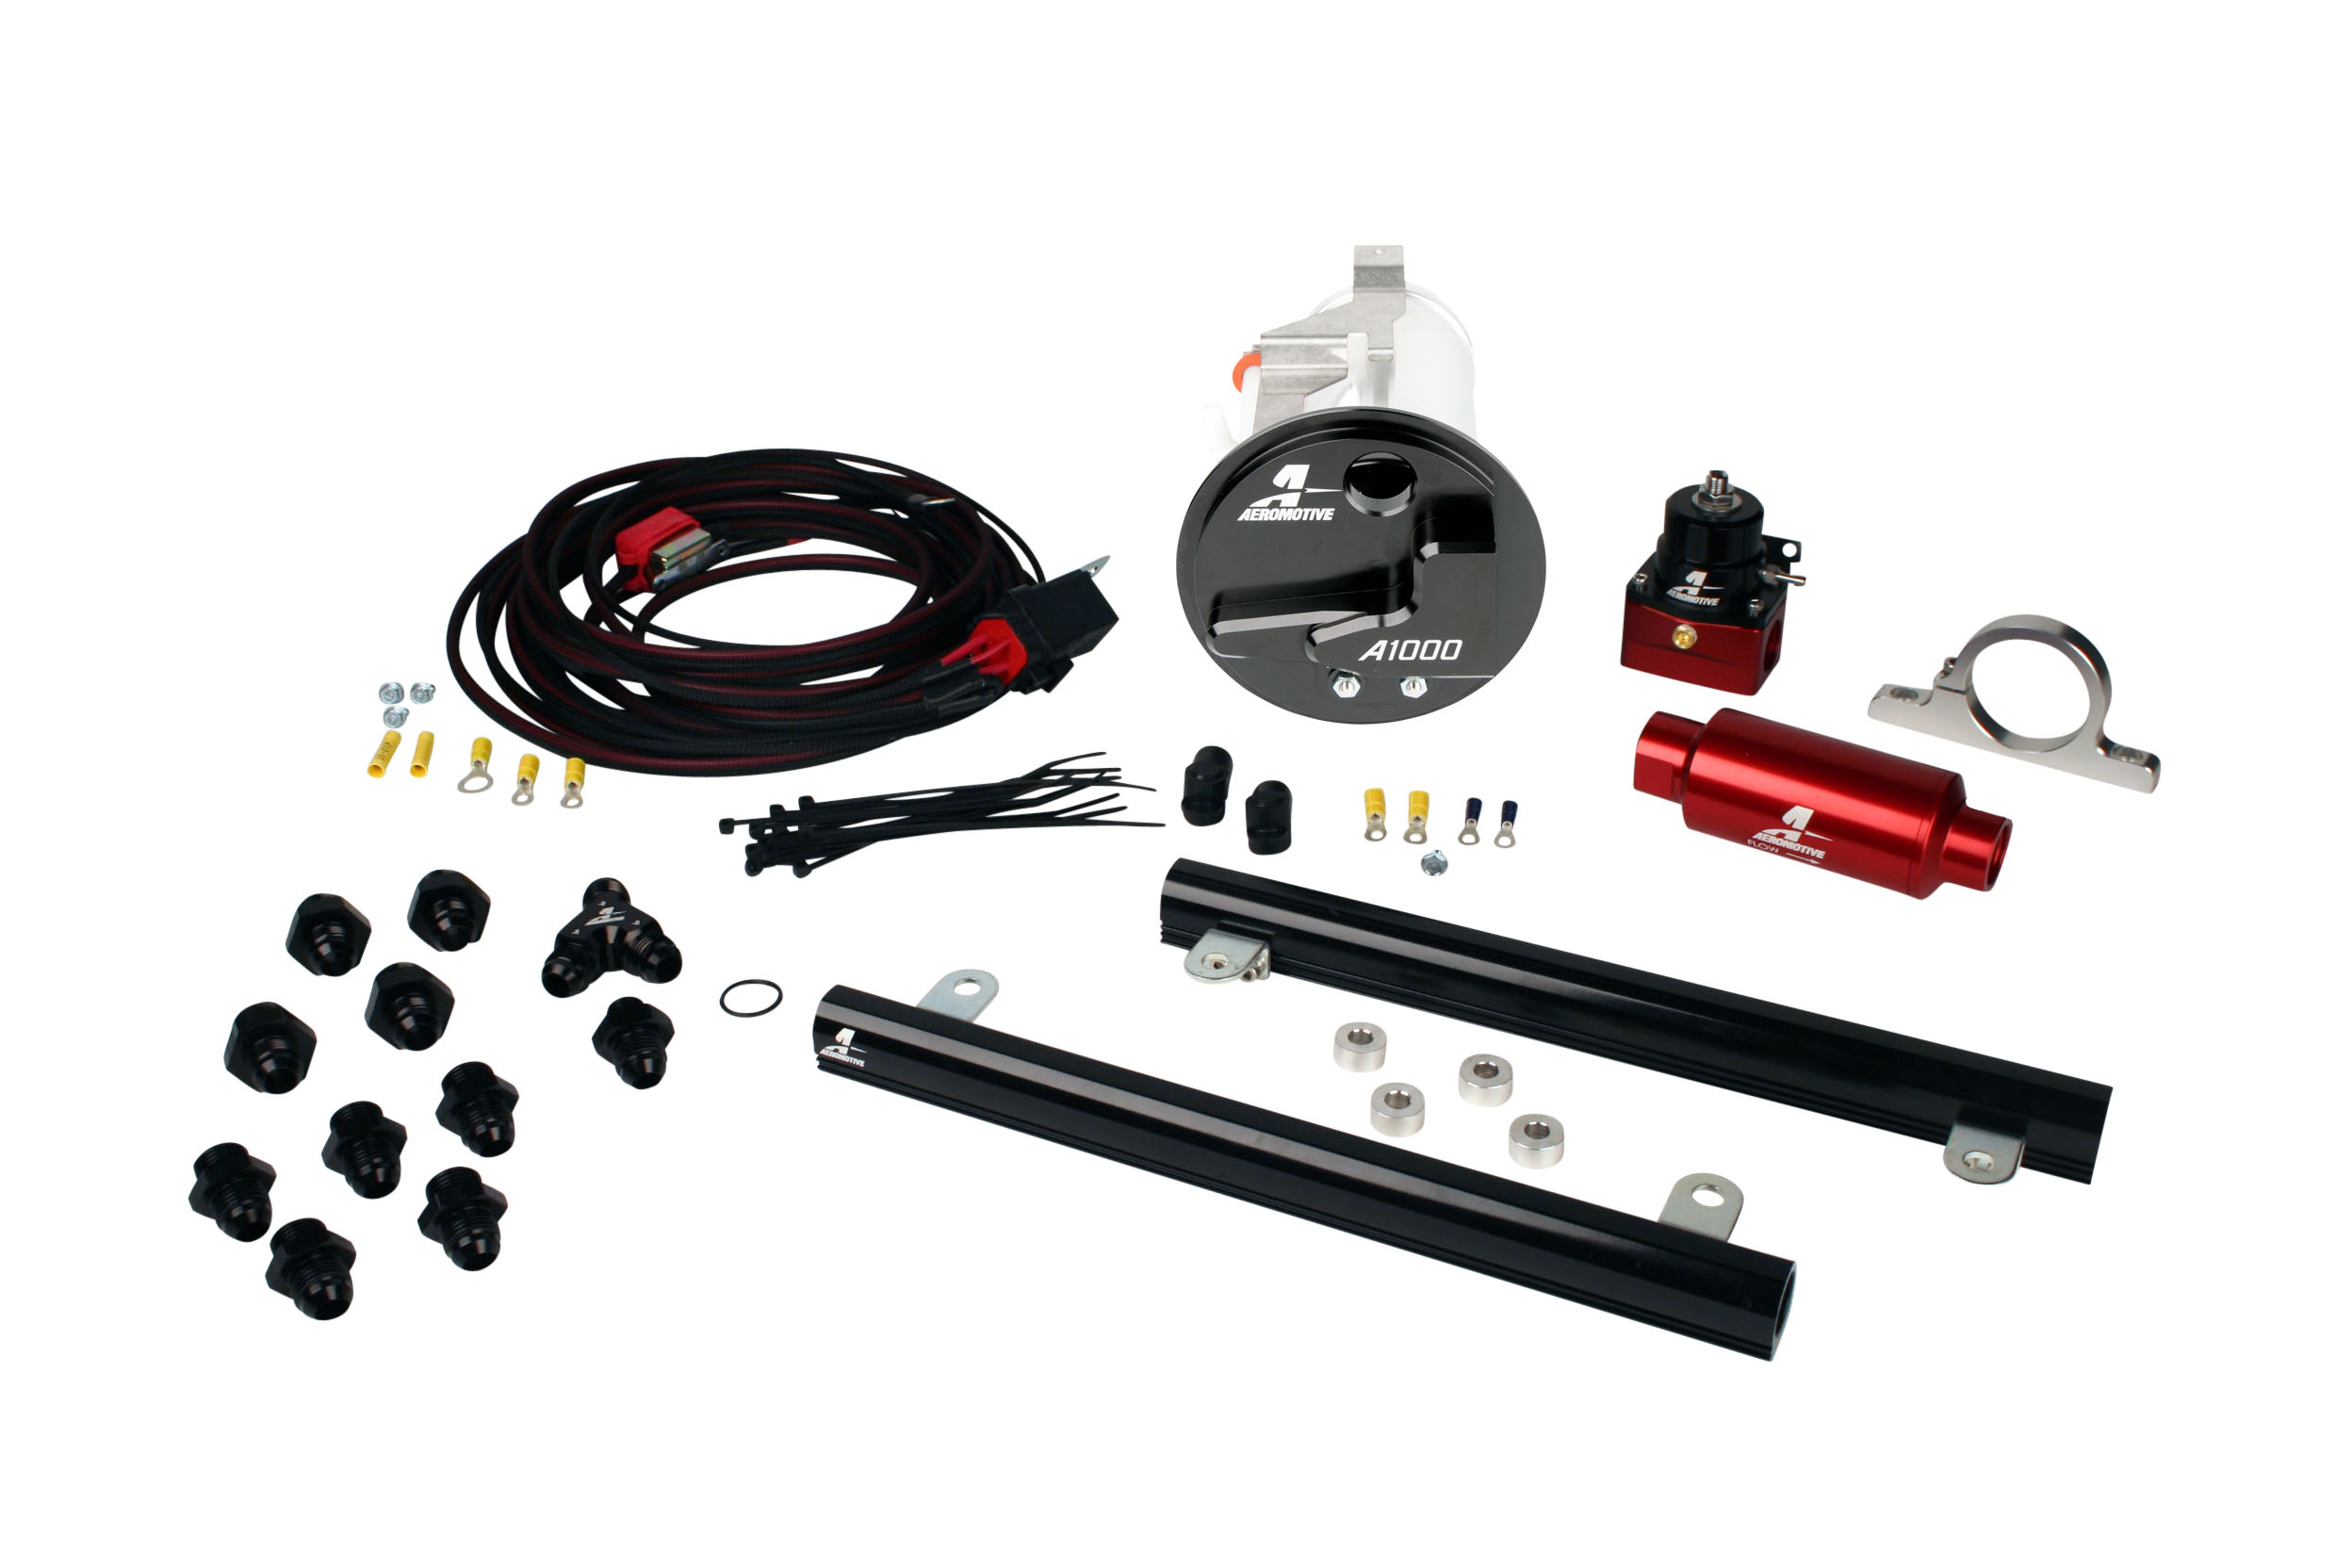 2005-2009 Ford Mustang GT Aeromotive Stealth A1000 Race Fuel System w/5.4L 4-V Fuel Rails Coyote Swap